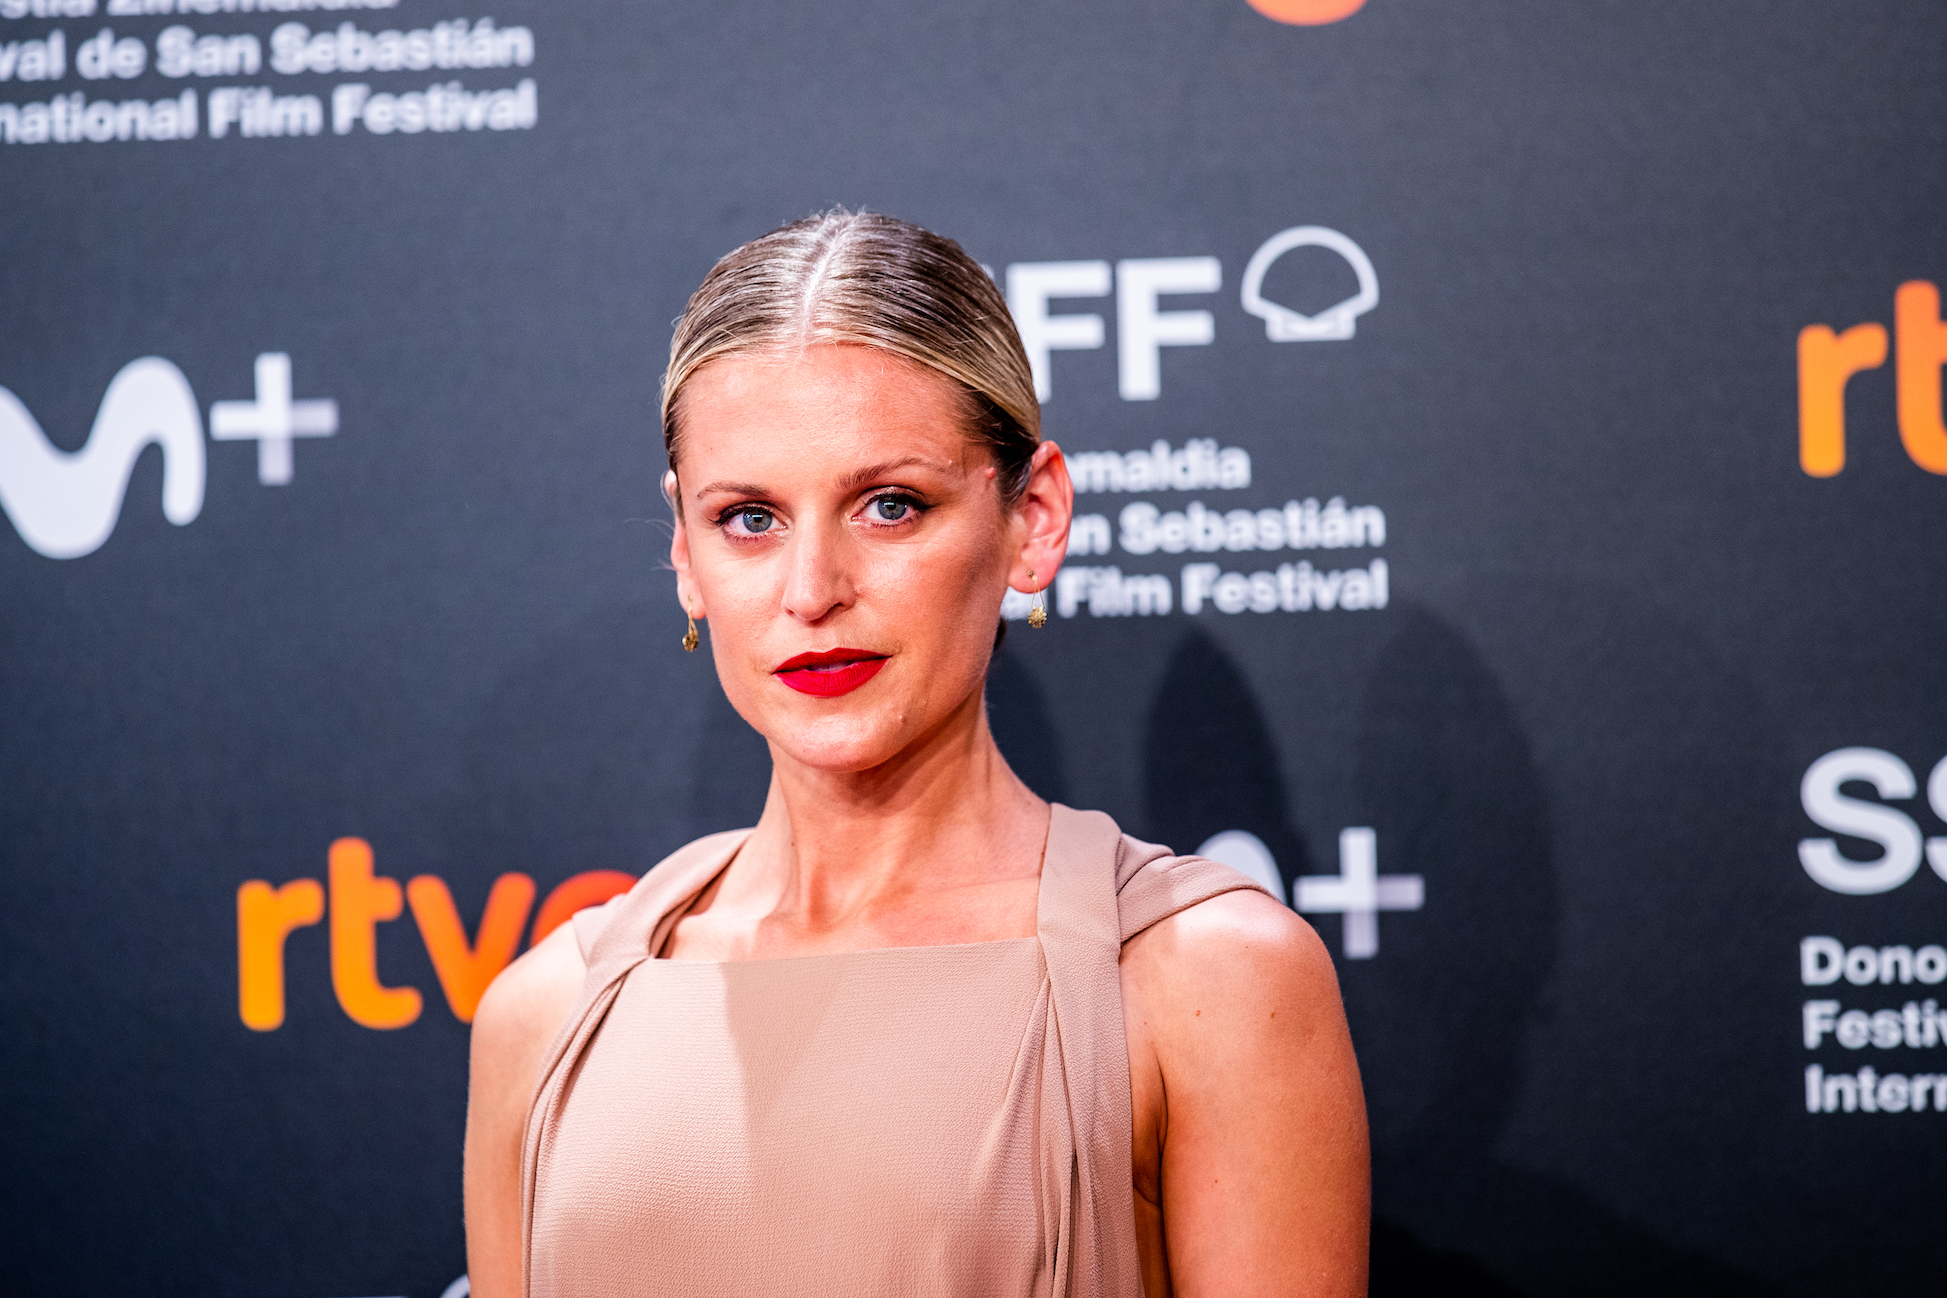 Andor actor Denise Gough attends the The Other Lamb premiere at the 67th San Sebastian Film Festival